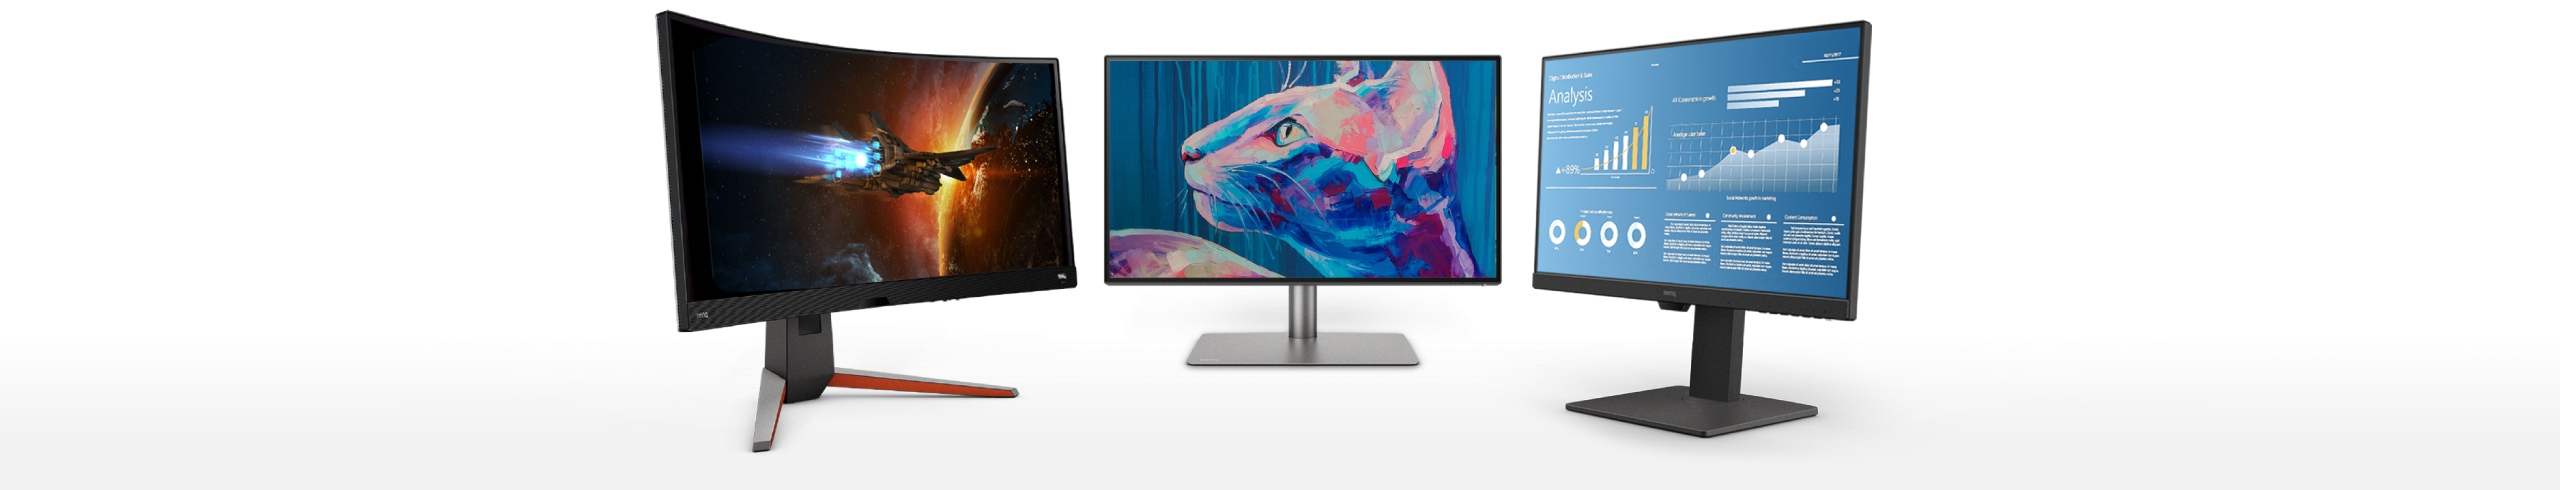 benq all monitors fitting perfectly for all spaces, uses, and needs.